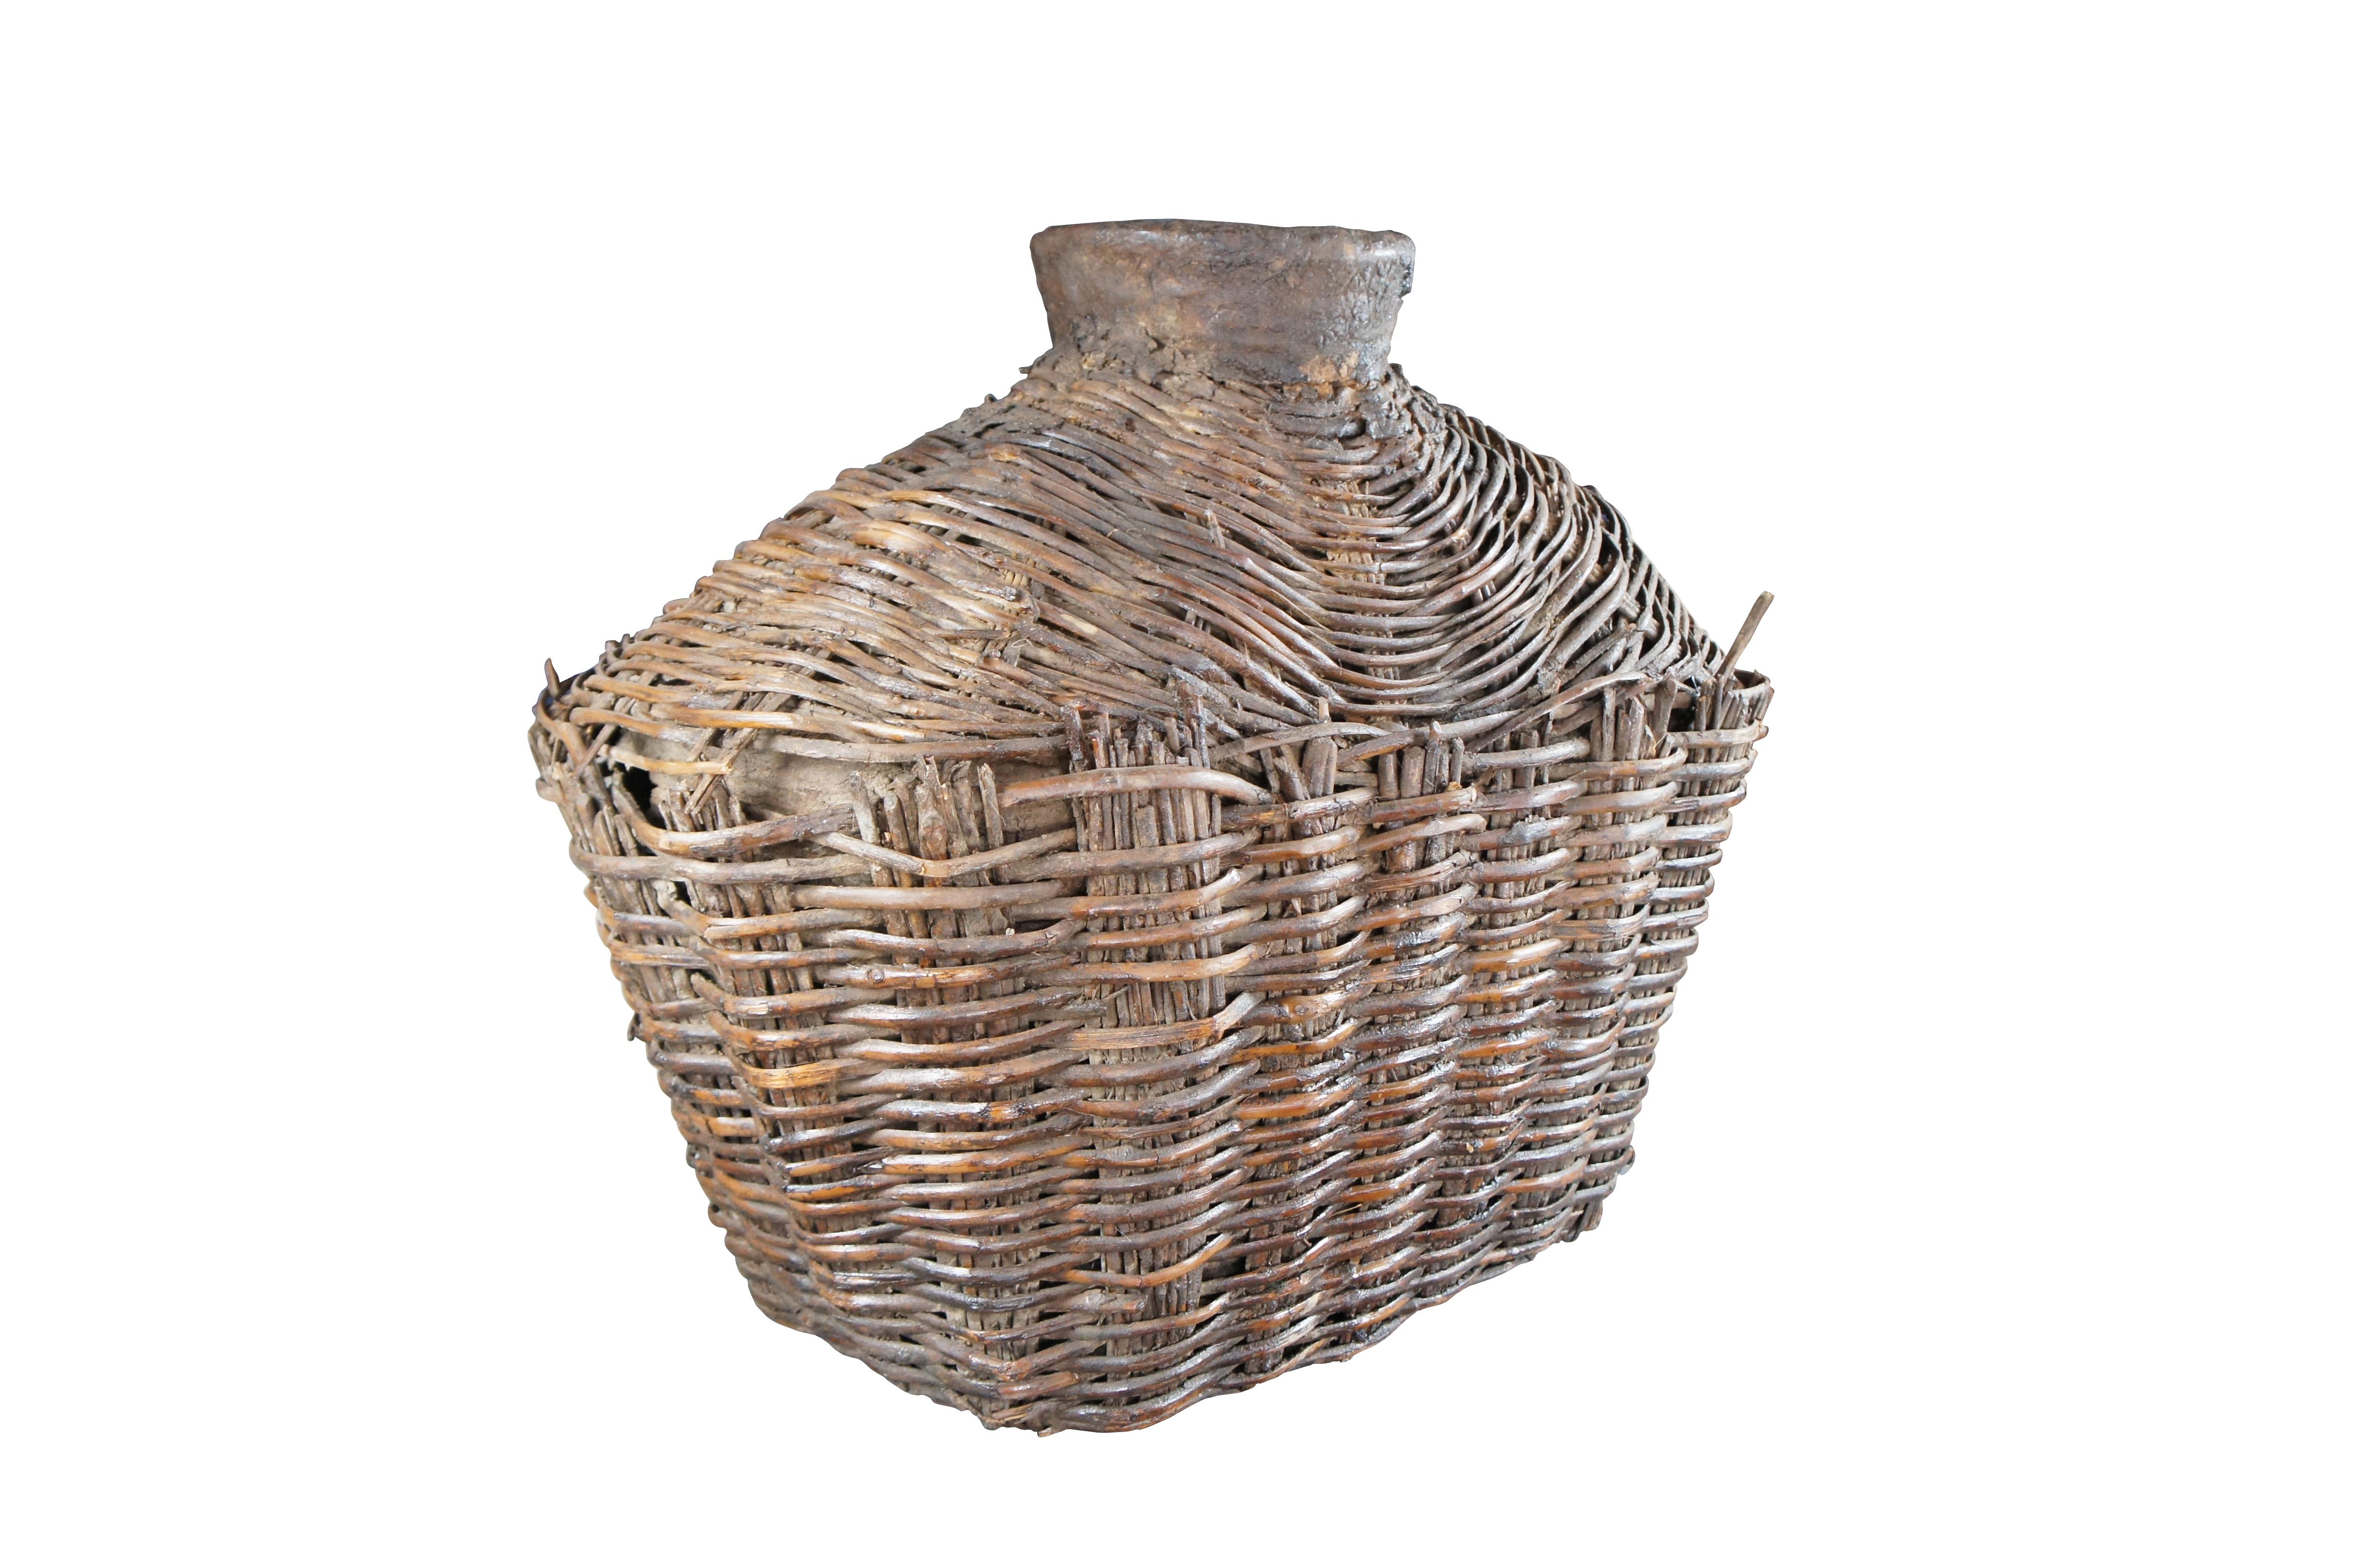 Early 20th Century Chinese Shanxi Willow Oil Container / Food Storage Vessel. Beautifully woven with natural patina from years of use. An unusual yet perfect decorative piece for display in a corner, on a bookcase or in a nook.

Dimensions:
27